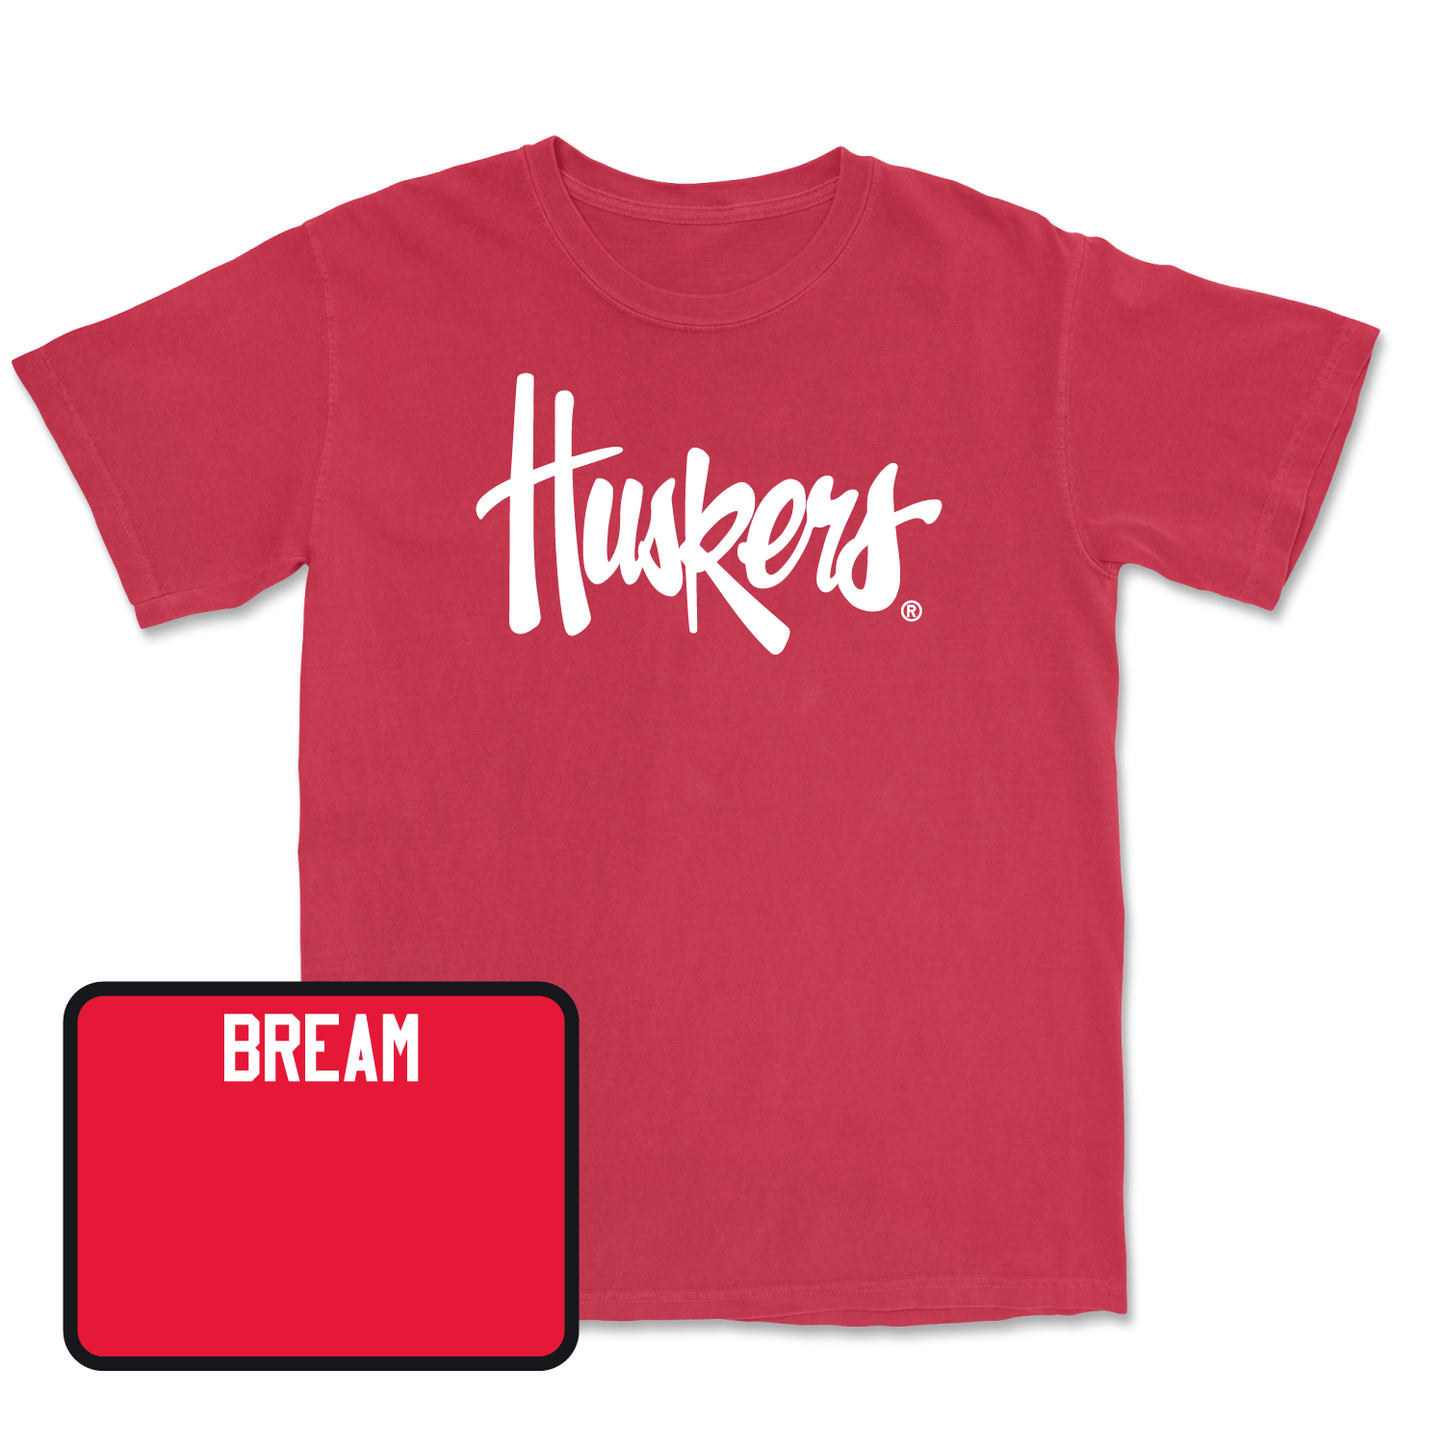 Red Women's Golf Huskers Tee 2X-Large / Brooke Bream